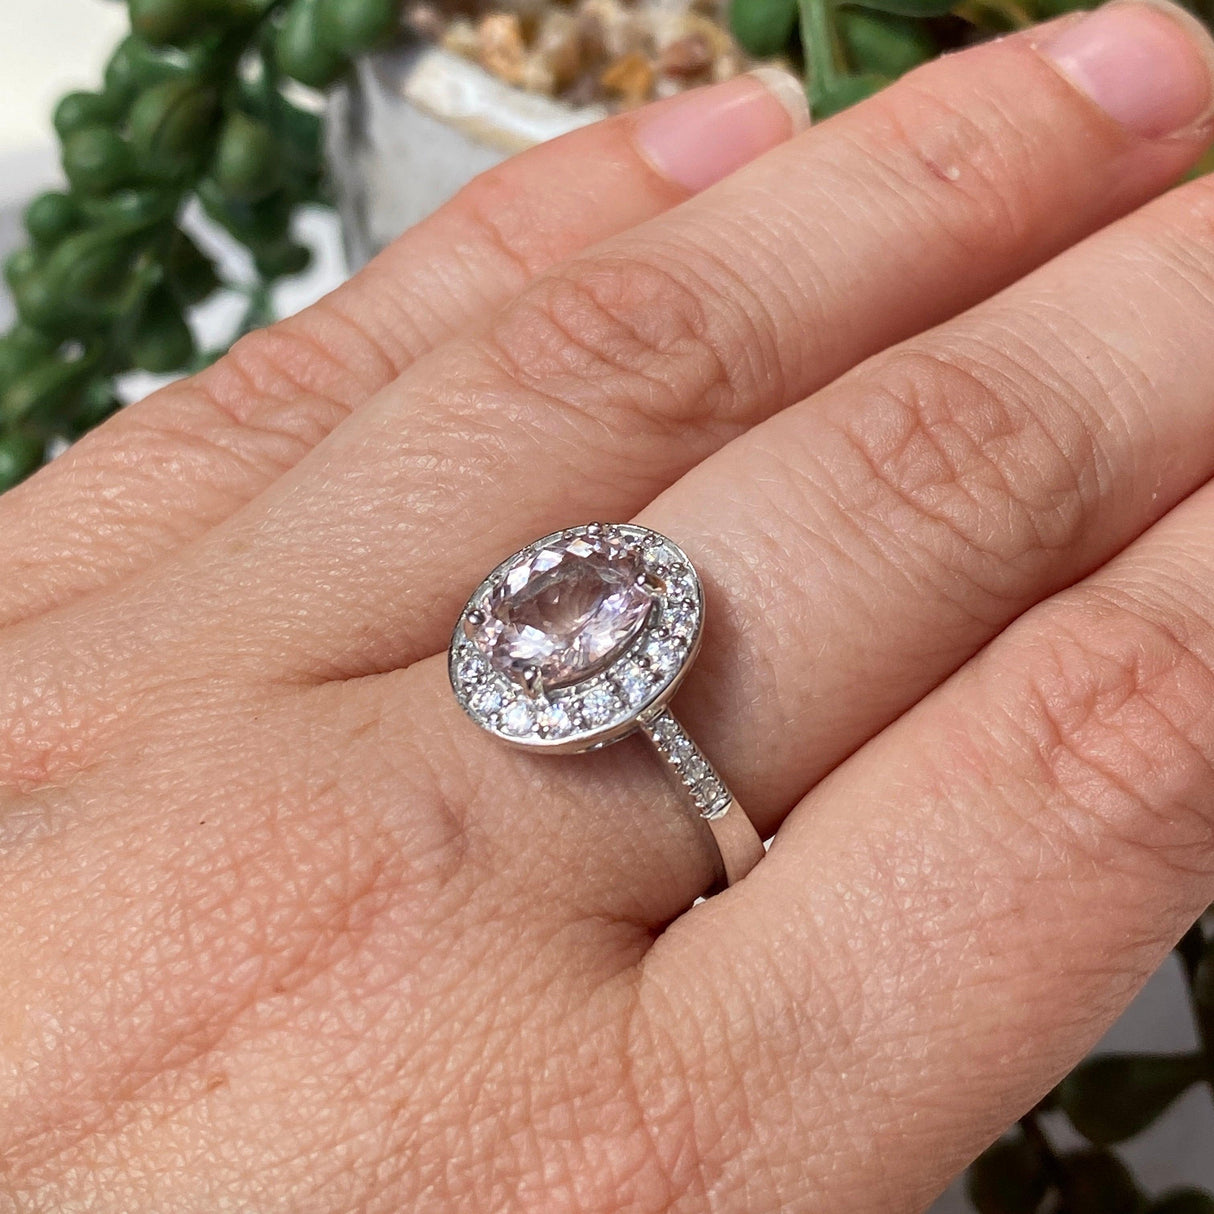 Morganite oval cut with CZ cocktail rings.8 HRGJ-10 - Nature's Magick